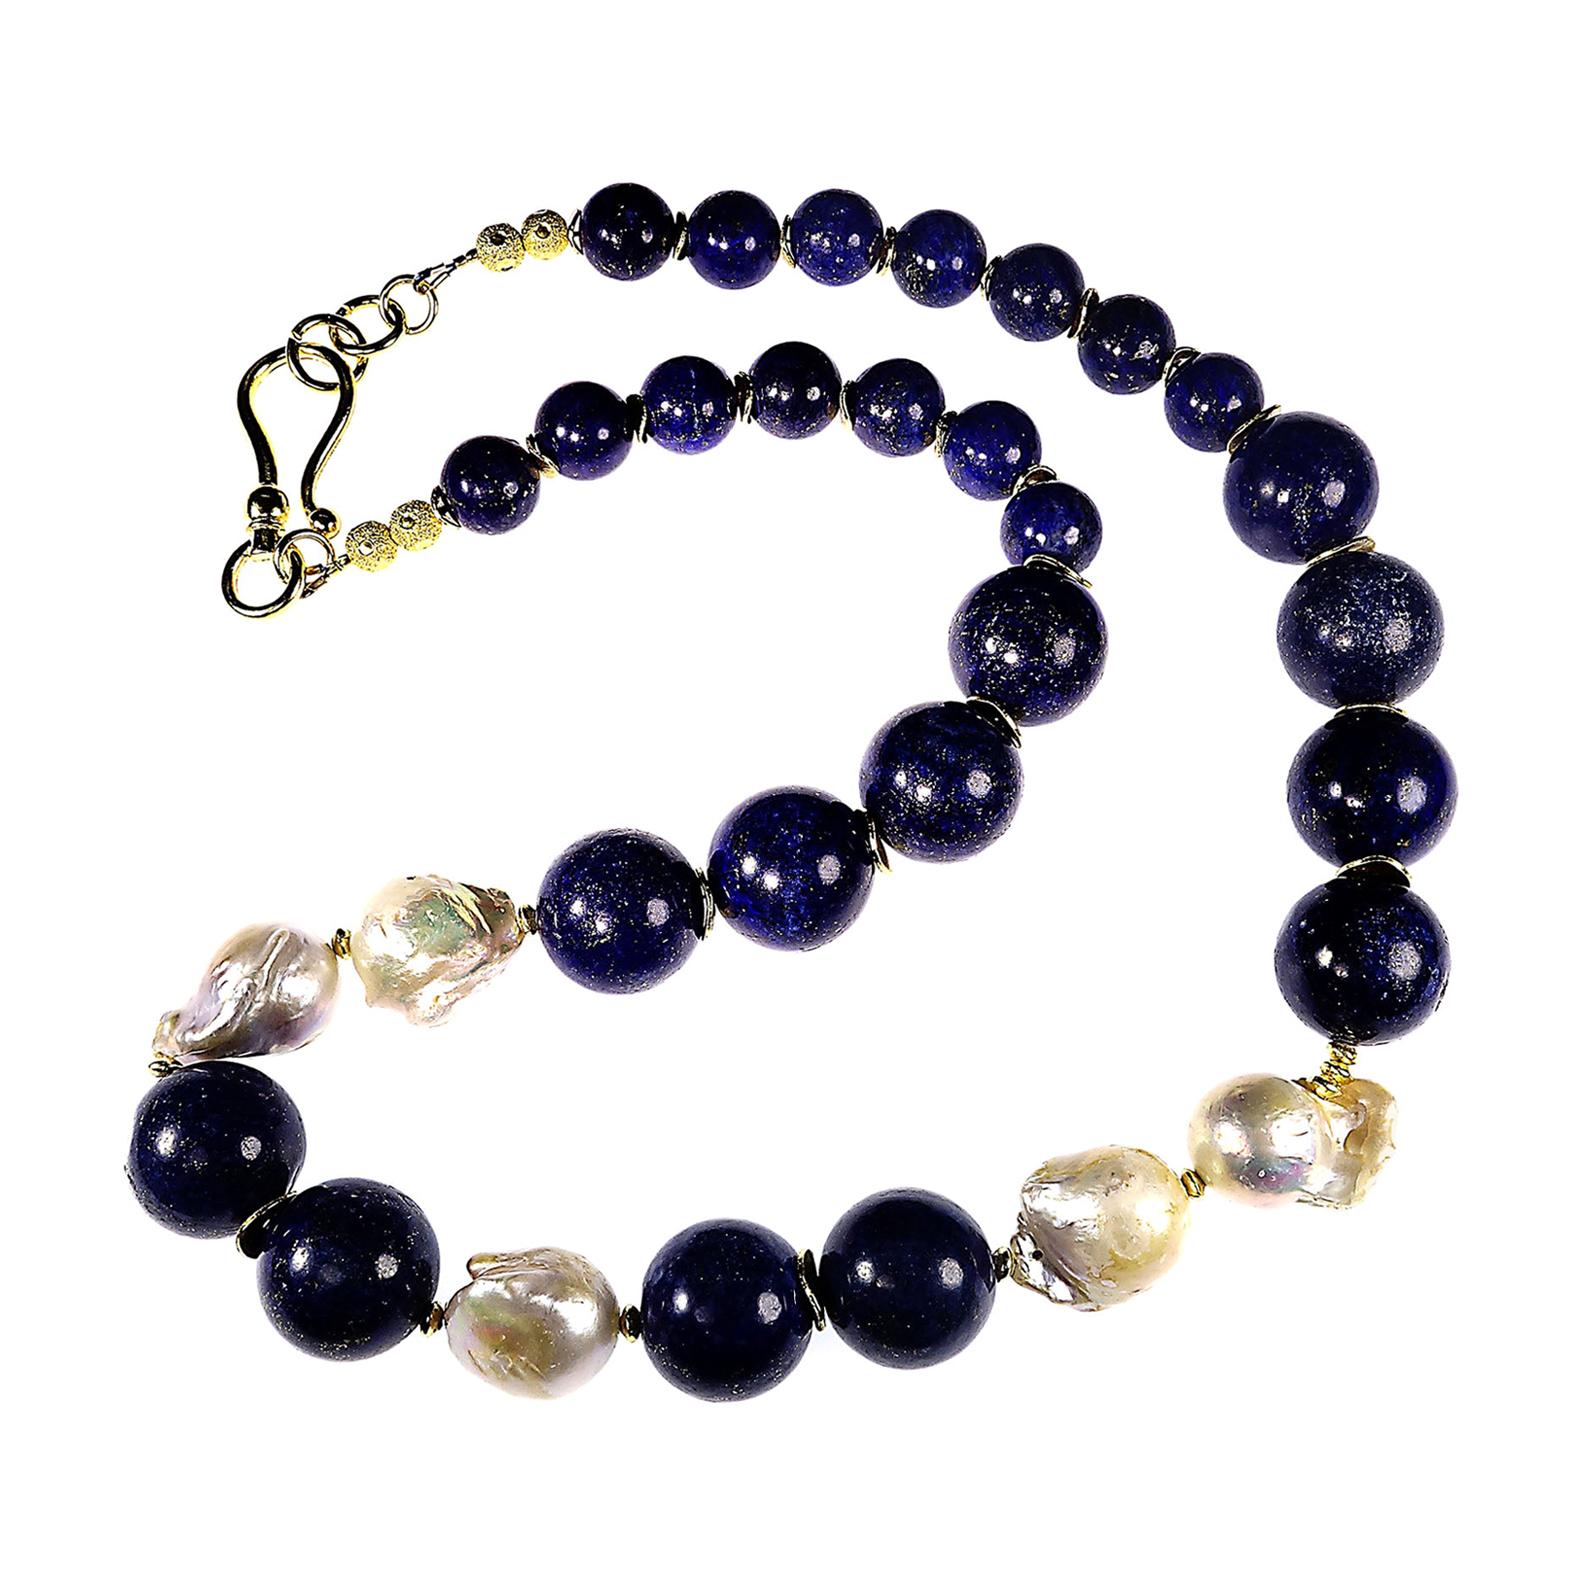 AJD 24 Inch Dramatic Blue Lapis Lazuli and White Baroque Pearl Necklace